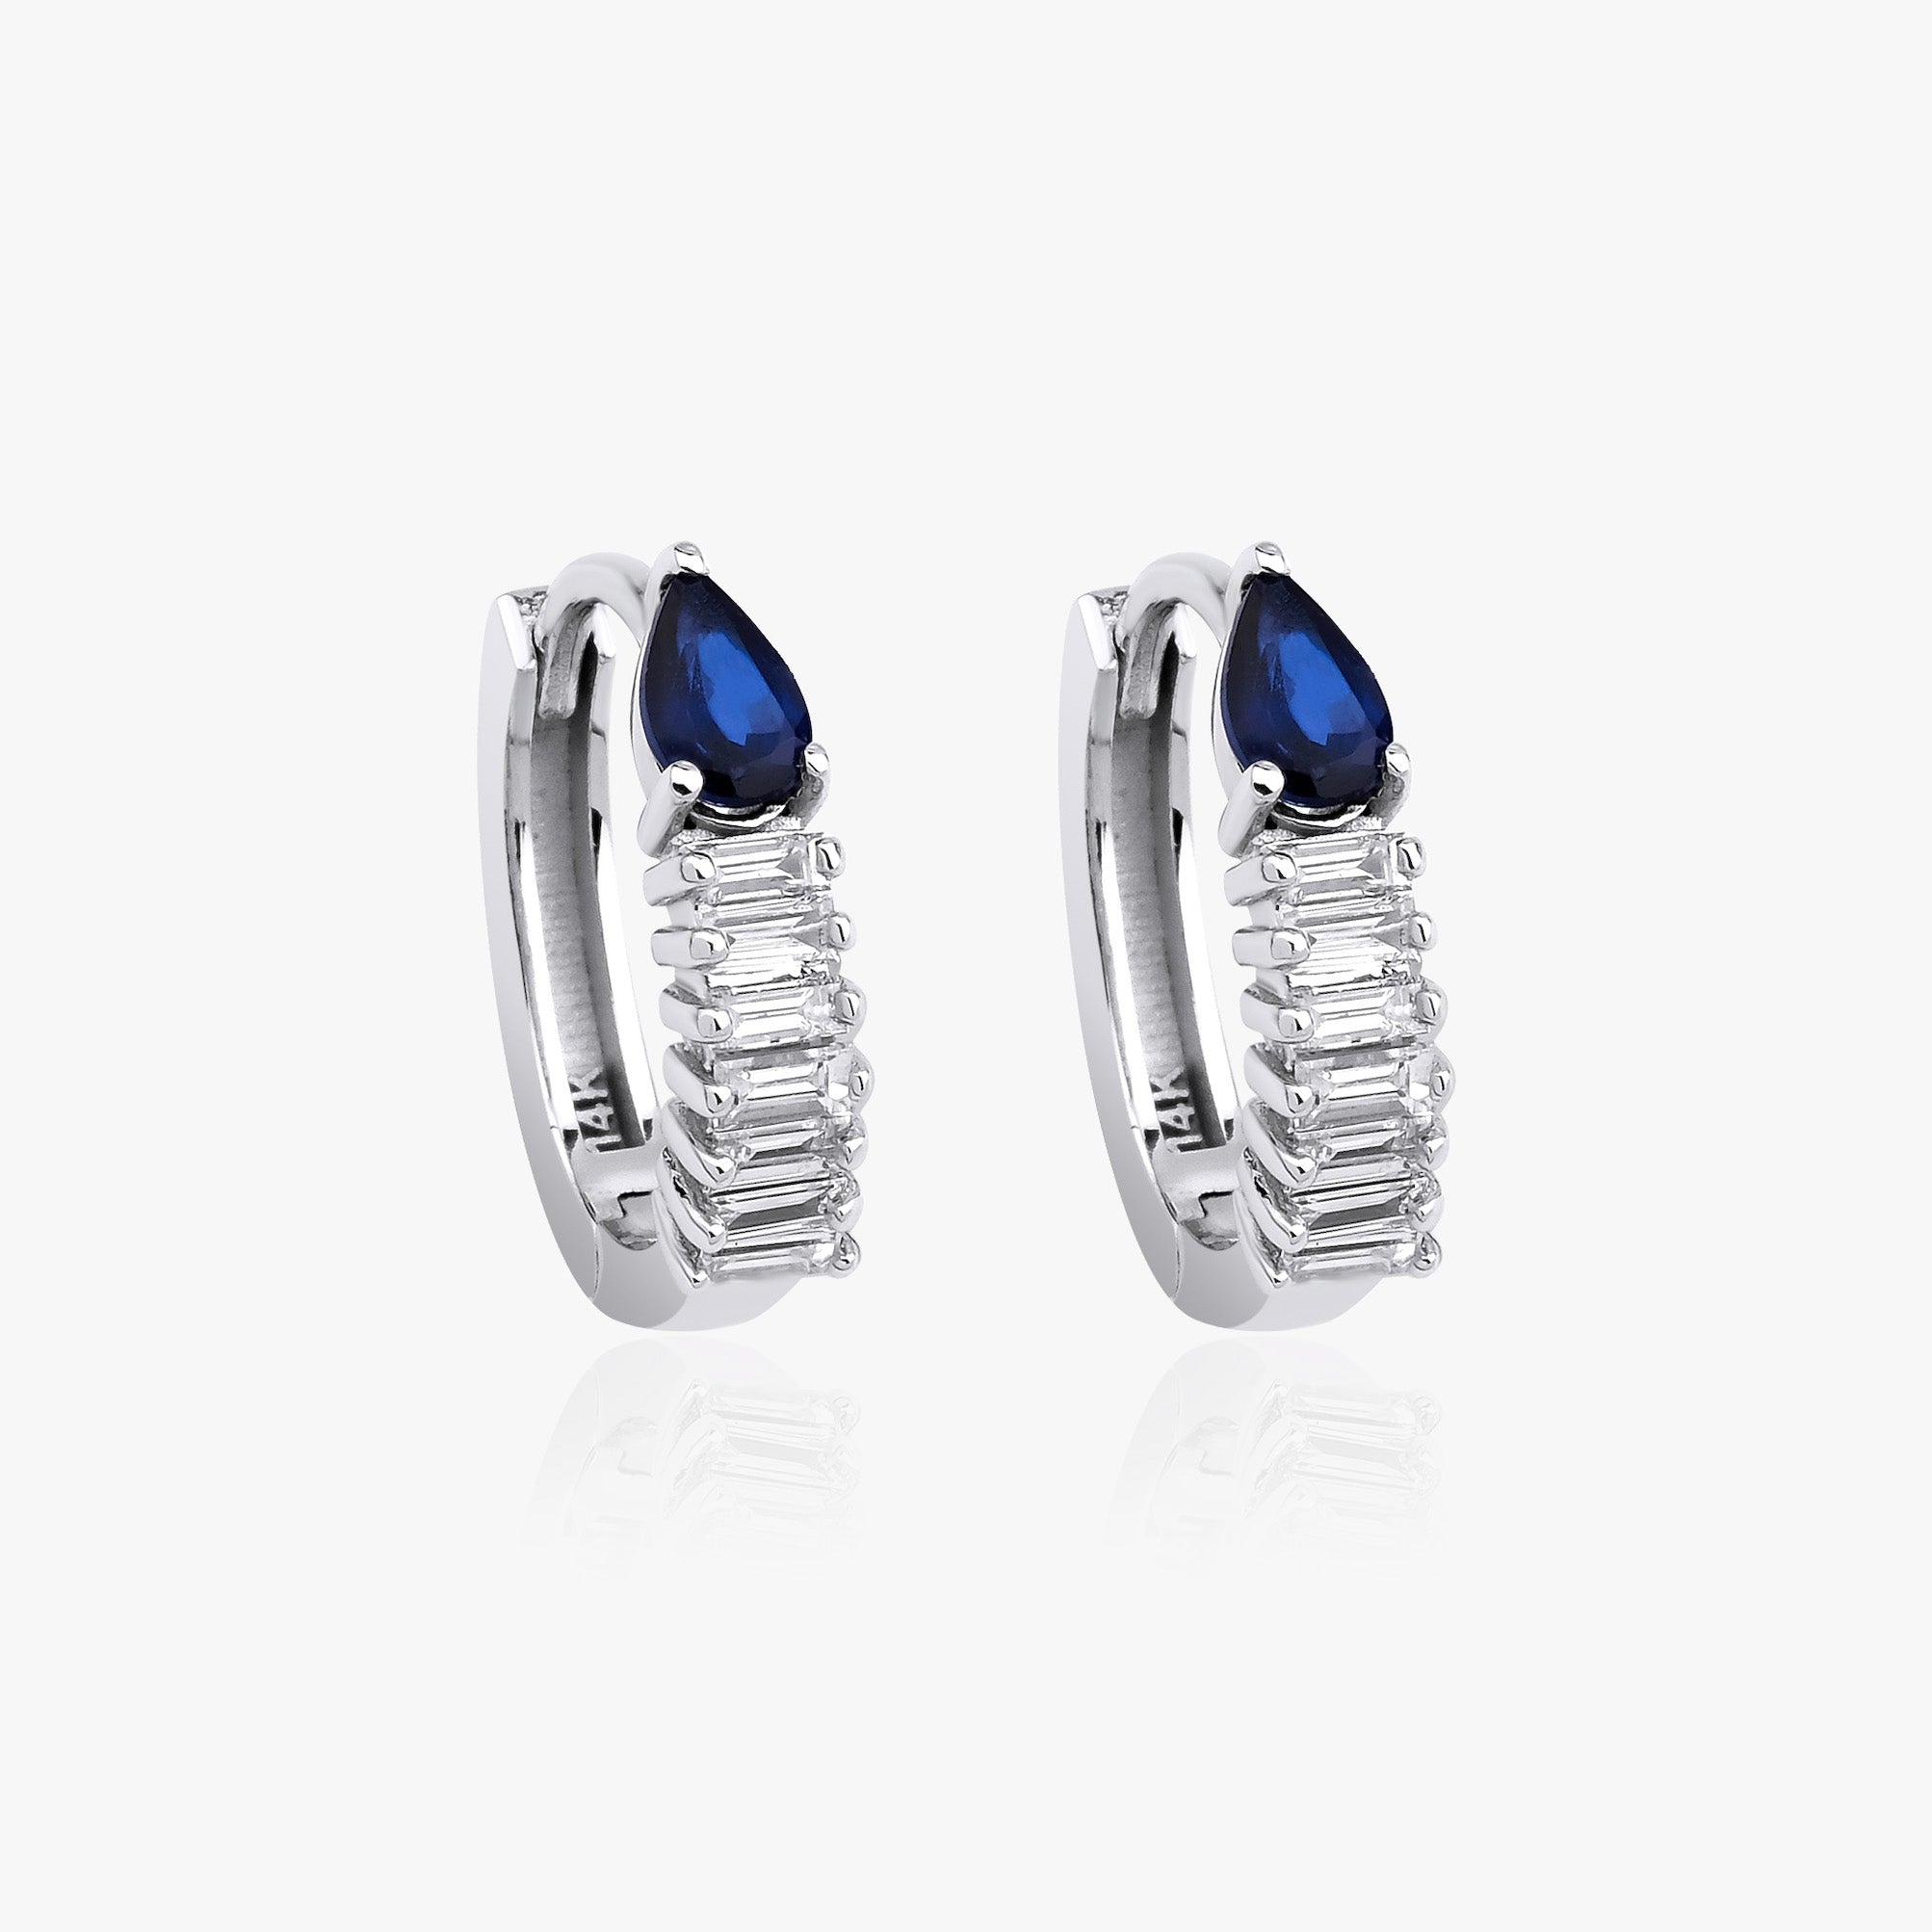 Sapphire Earrings With Baguette Cut Diamonds AvailableiIn 14K and 18K Gold